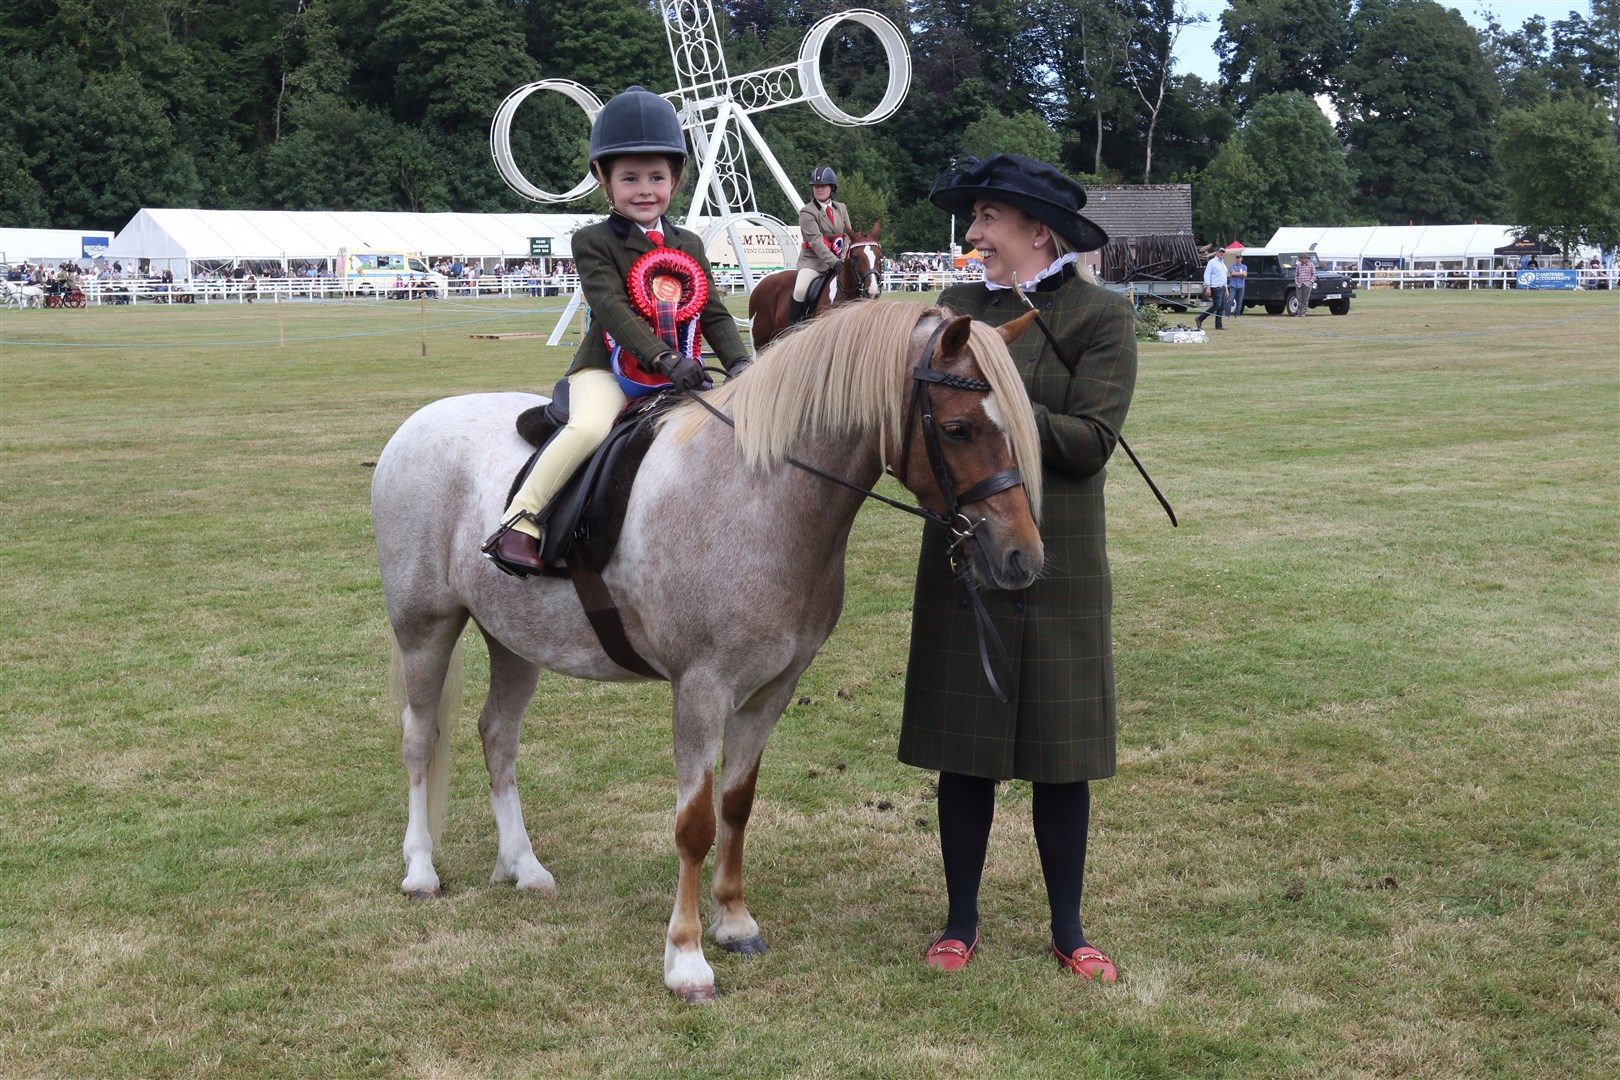 The reserve champion title went to Lingardswood Sarsaparilla which is owned by Shannon Mair and was ridden by Francesca Mair from Inverness.